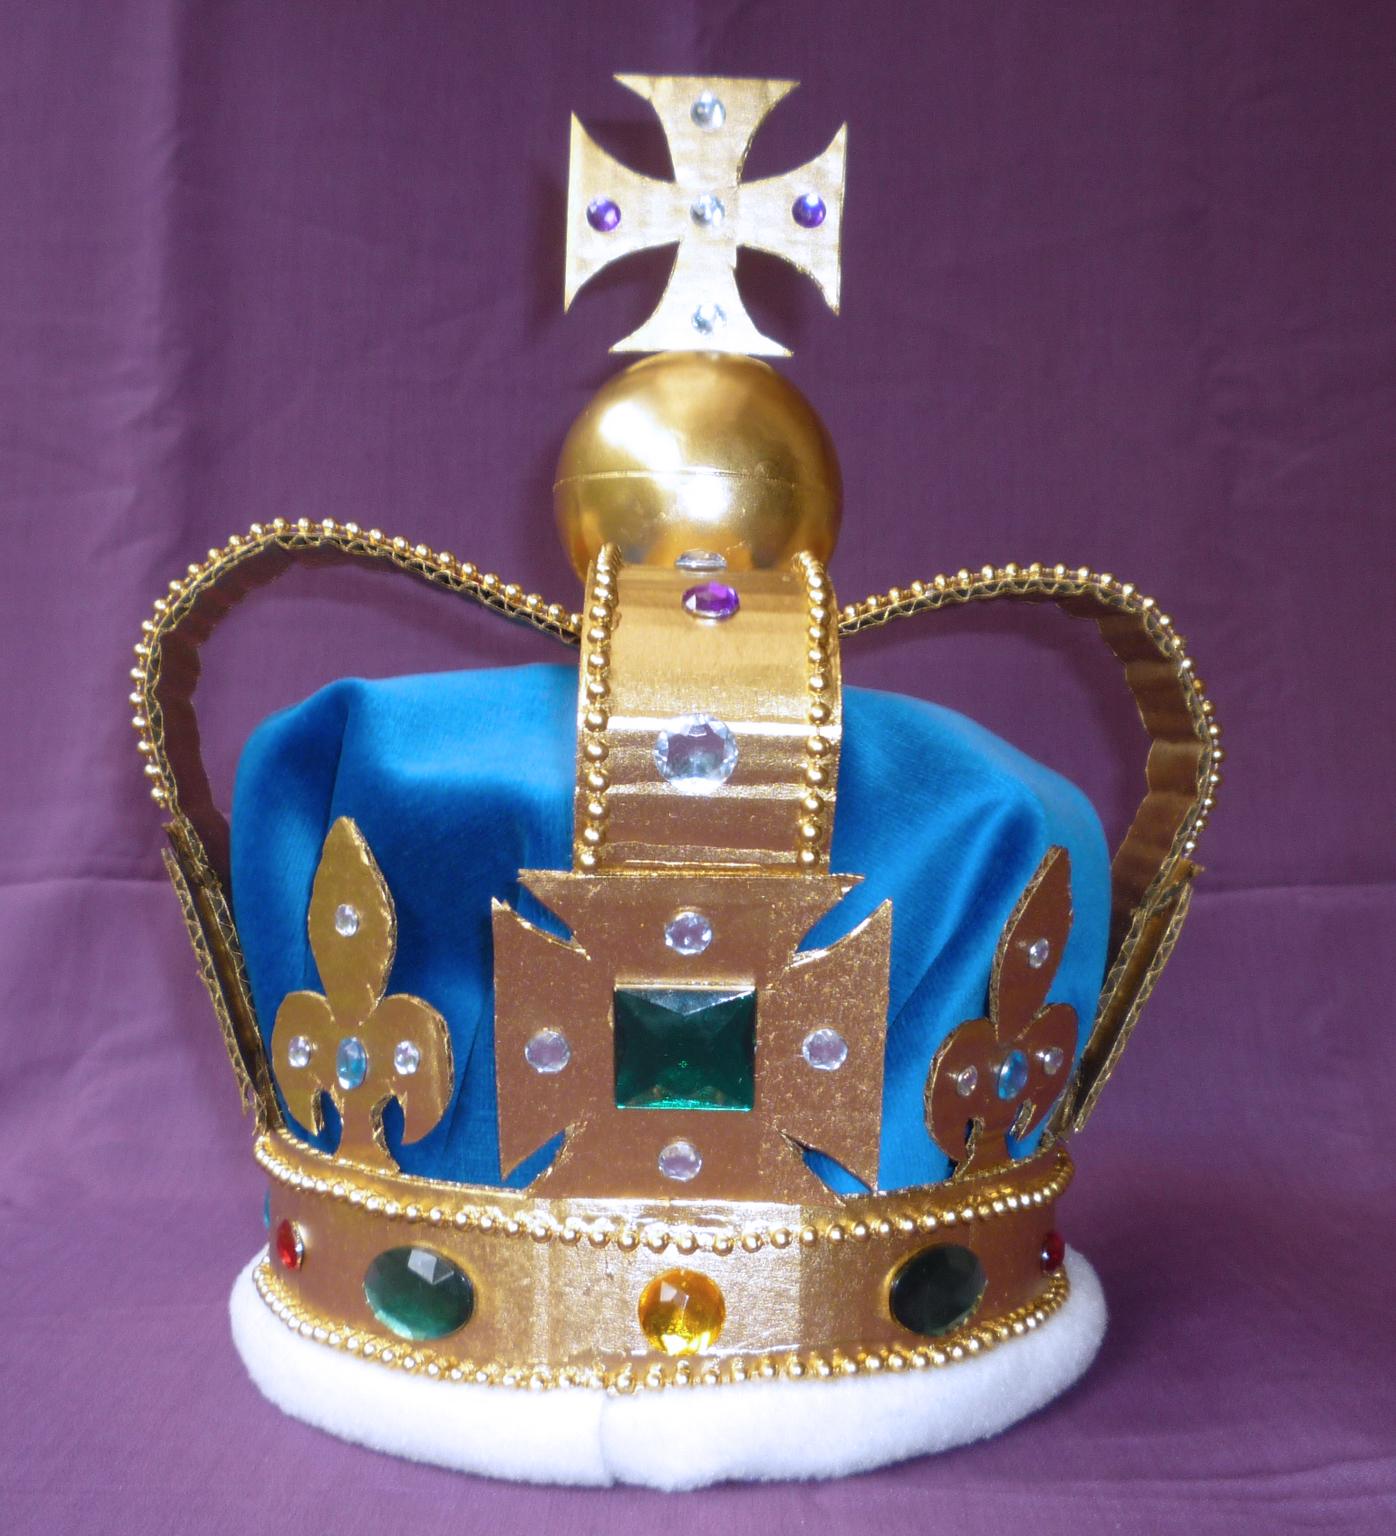 *starking crafty and party*: the crown jewels